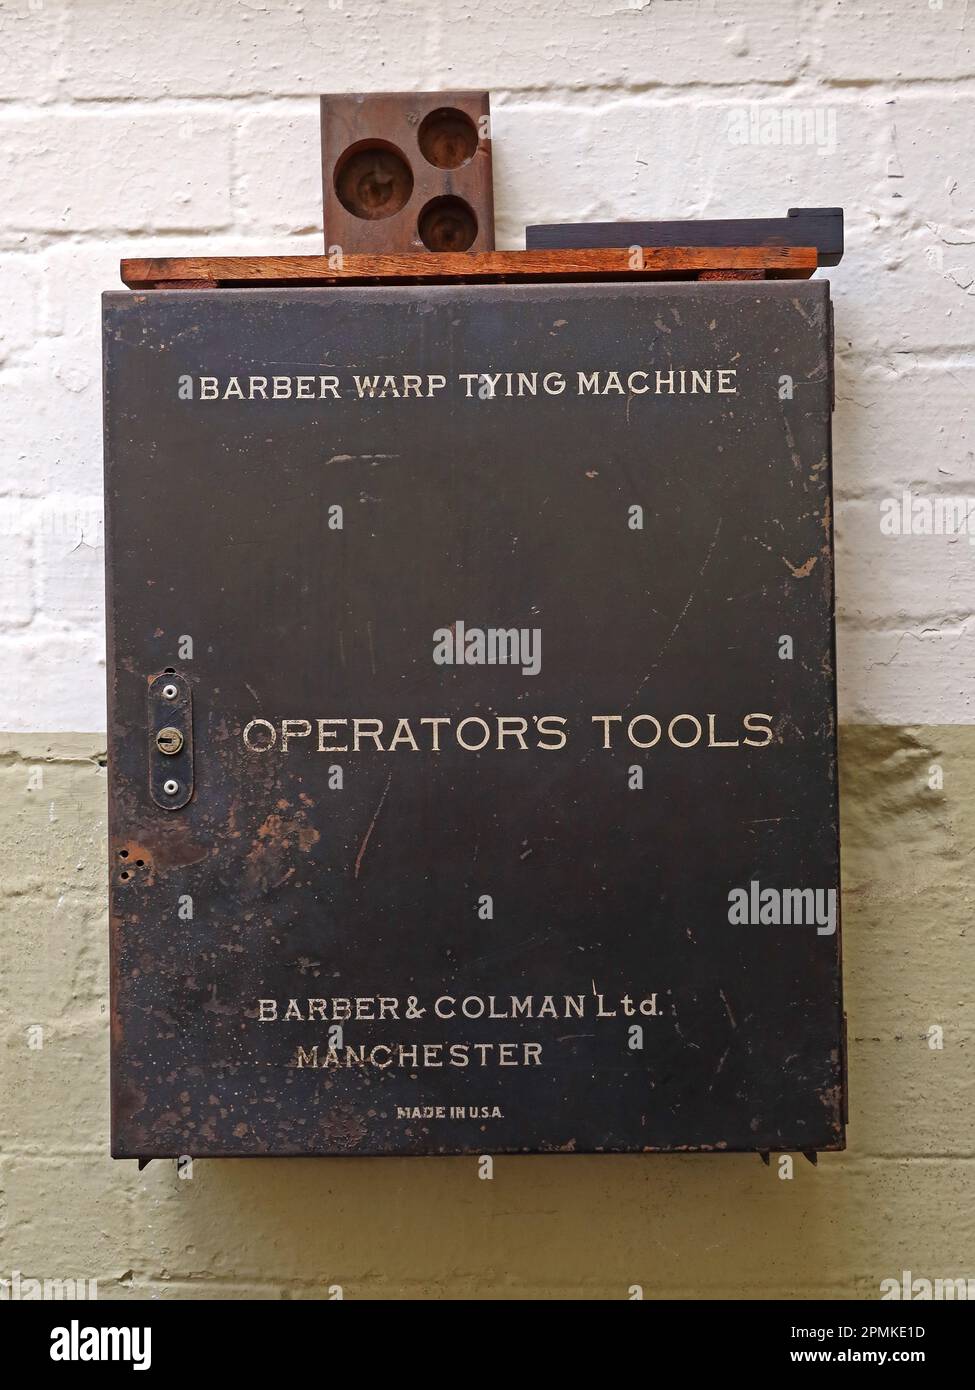 Box of operators tools, Barber Warp Tying machine, Barber & Colman Manchester, made in USA Stock Photo